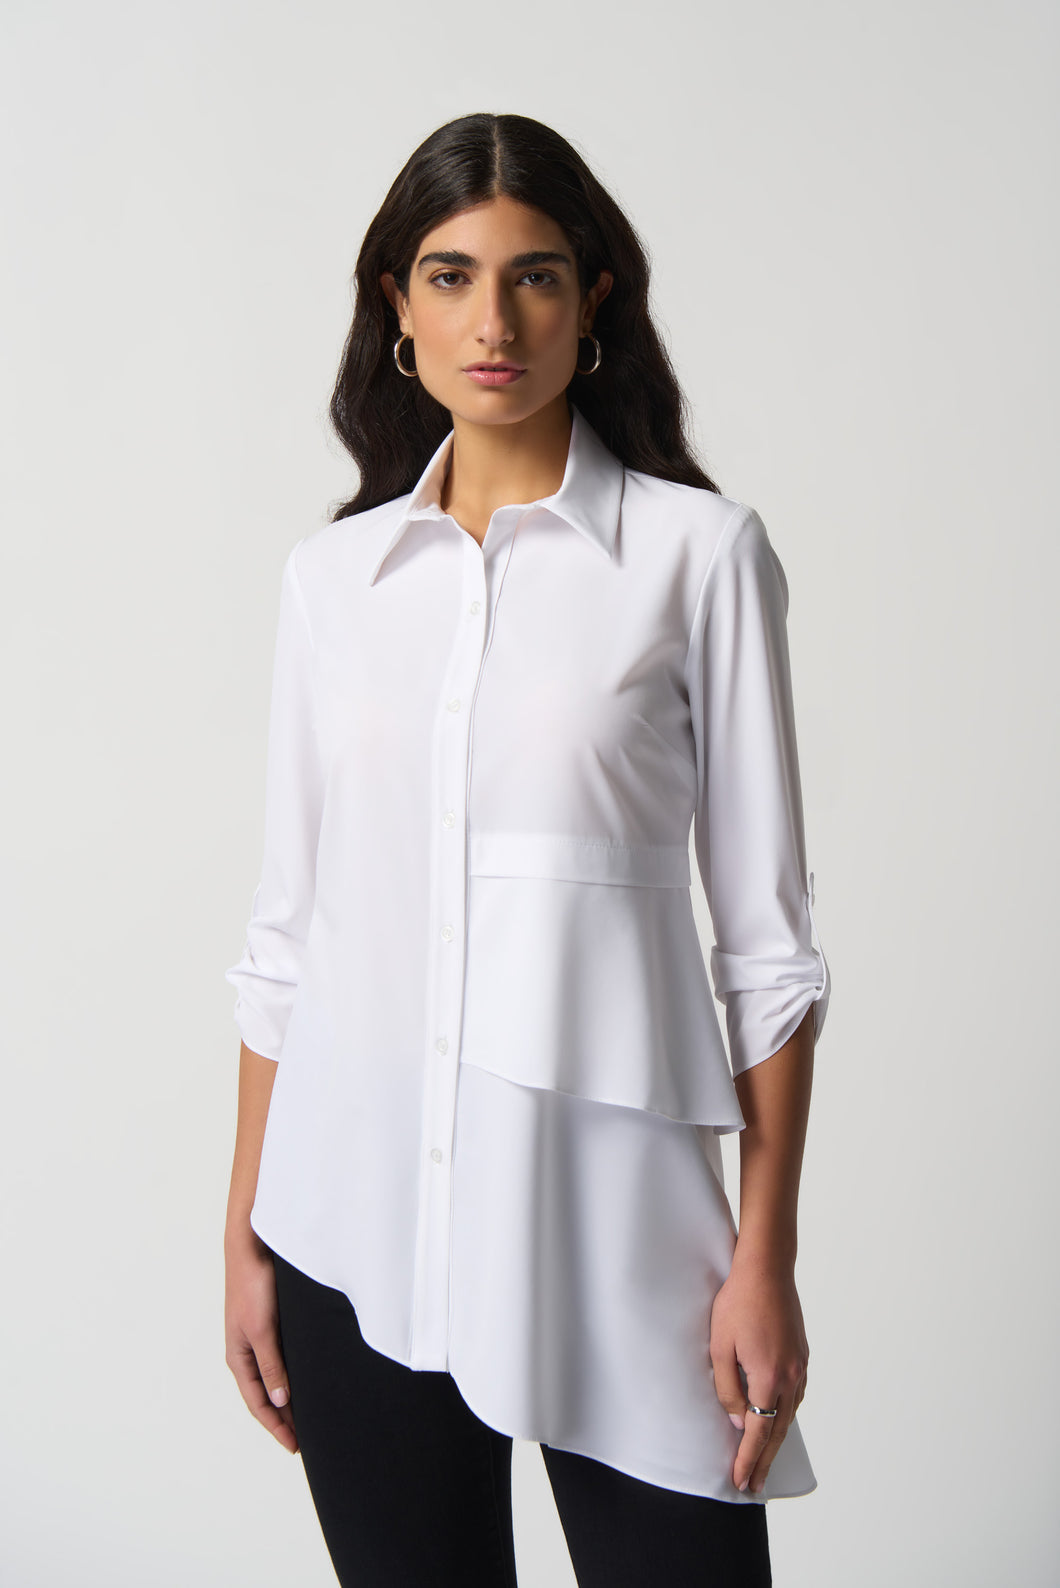 Asymmetrical Ruffled Blouse by Joseph Ribkoff (available in plus sizes)